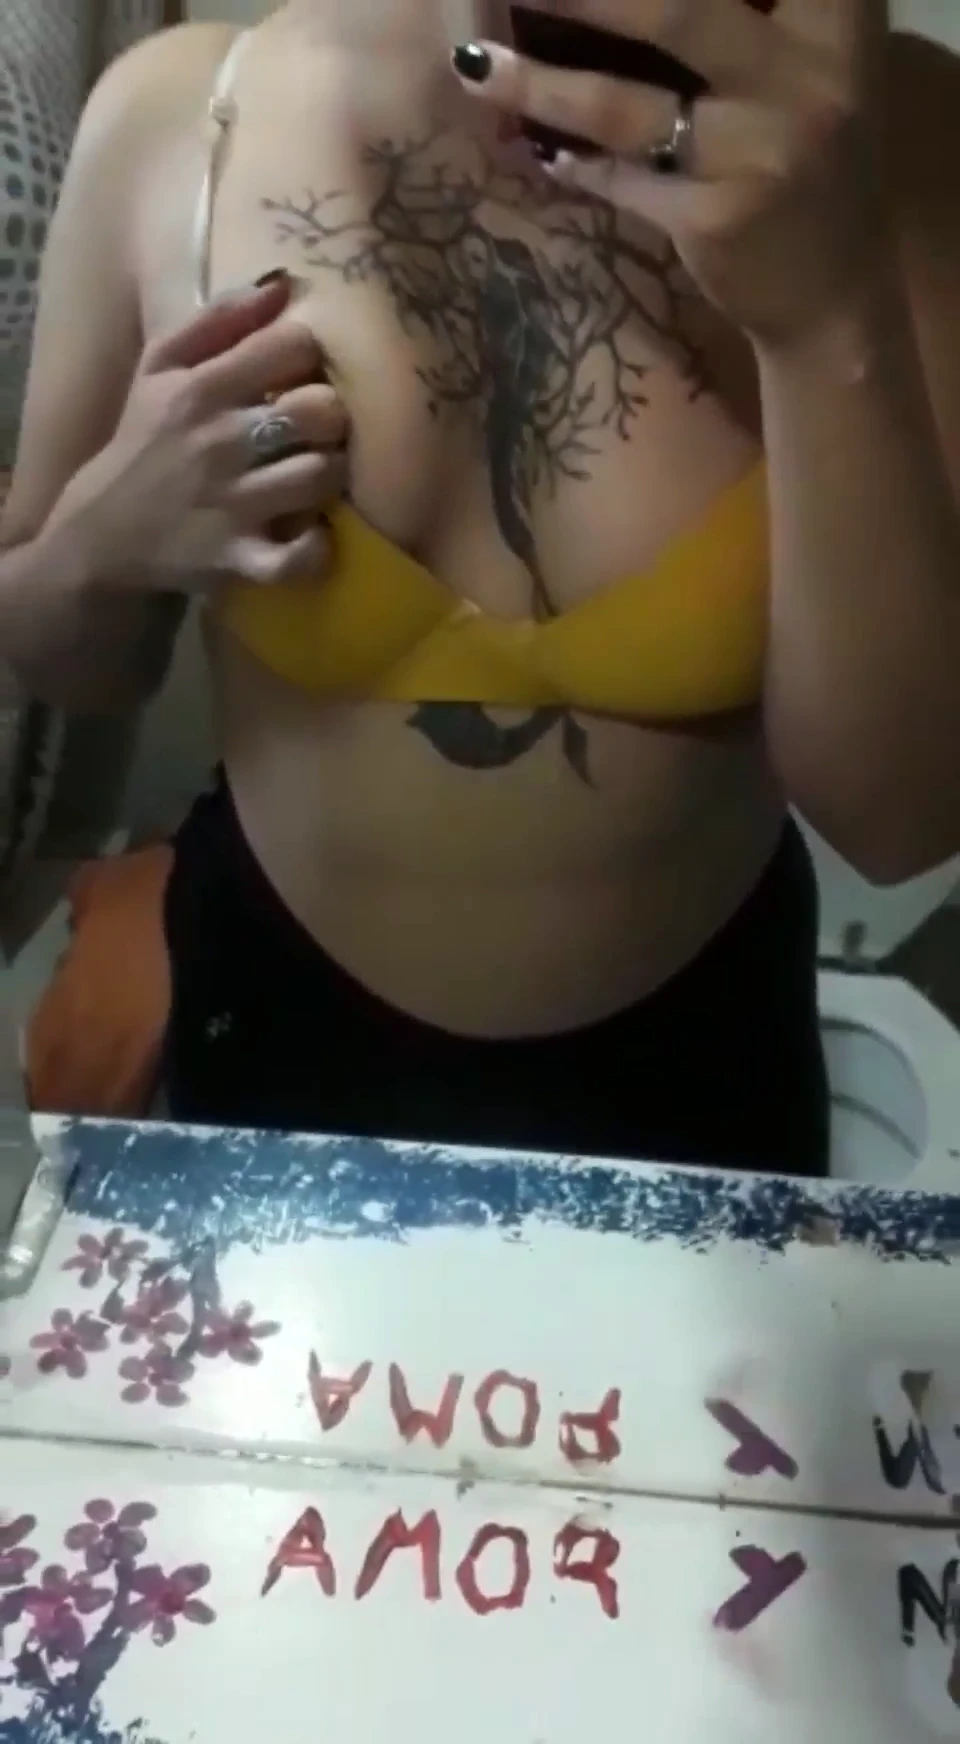 Do you want to have fun with my boobs?